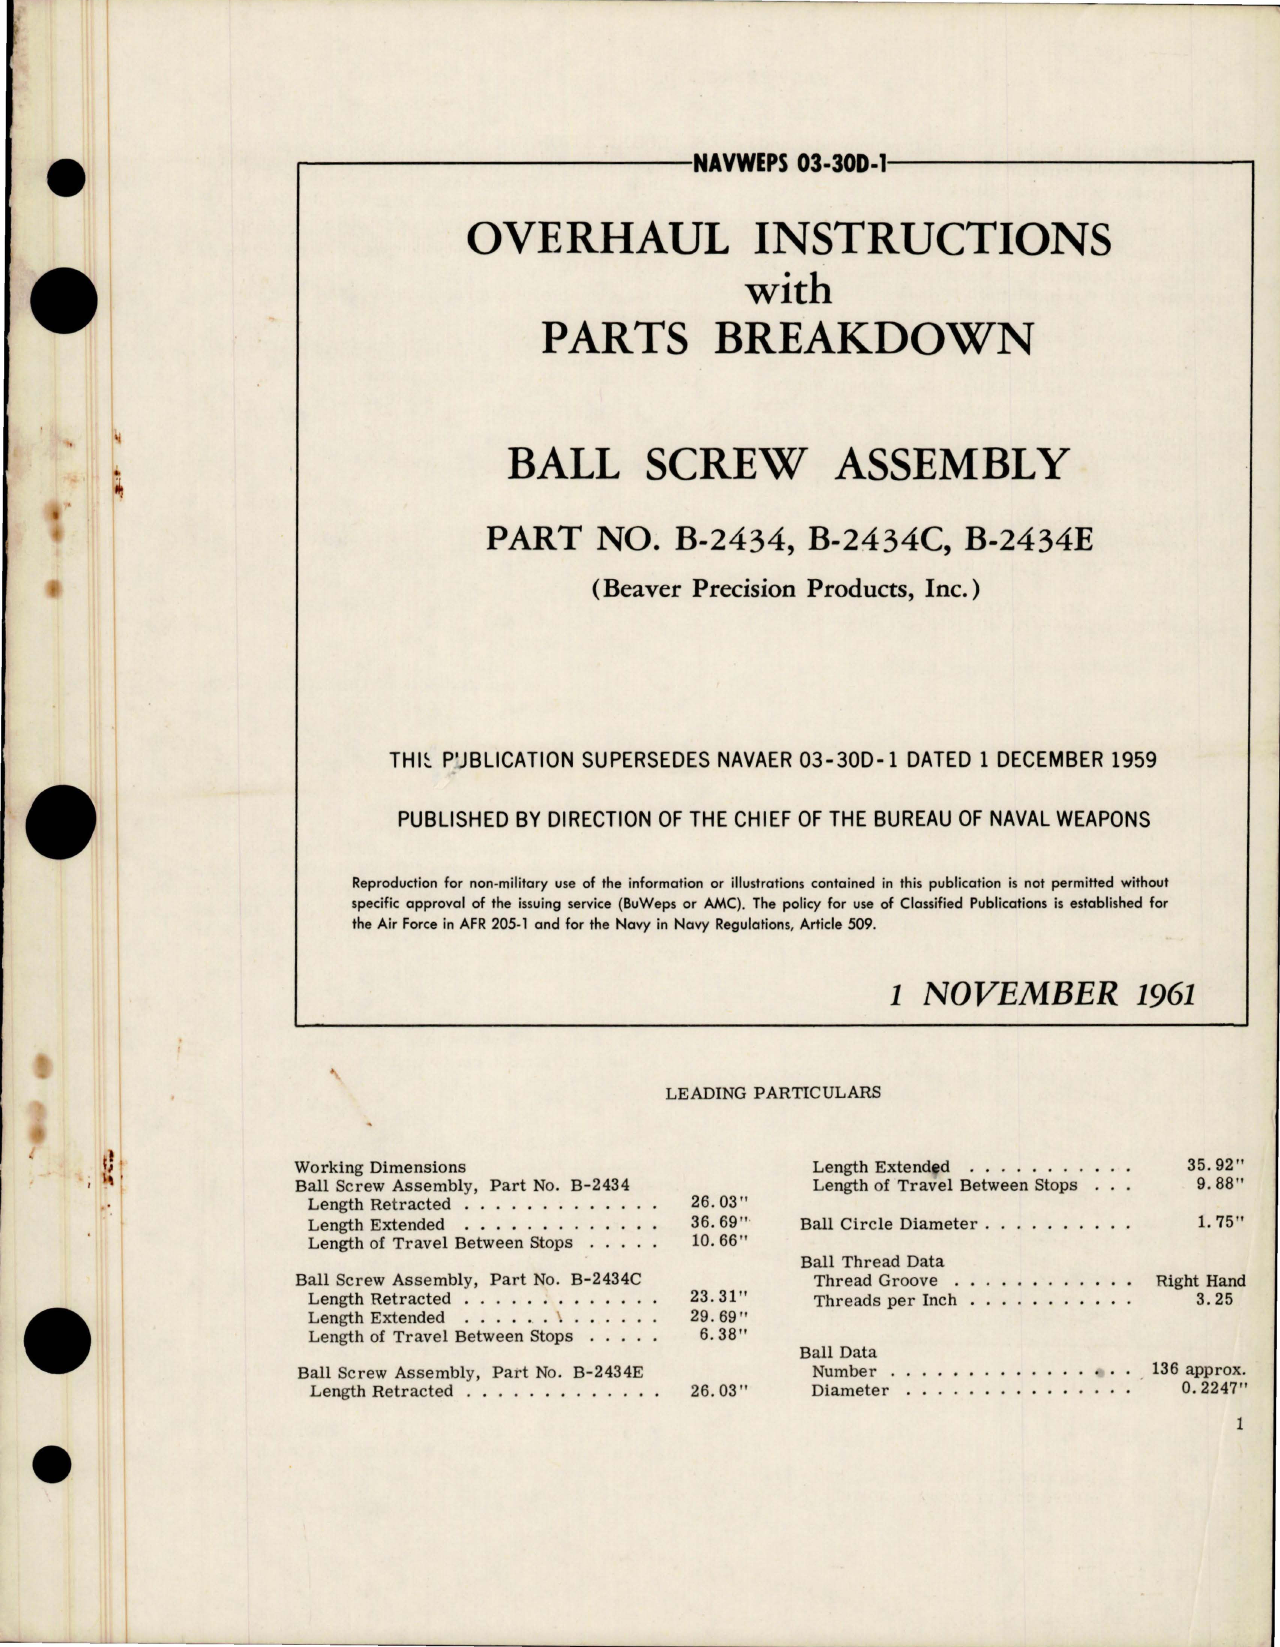 Sample page 1 from AirCorps Library document: Overhaul Instructions with Parts Breakdown for Ball Screw Assembly - Parts B-2434, B-2434C and B-2434E